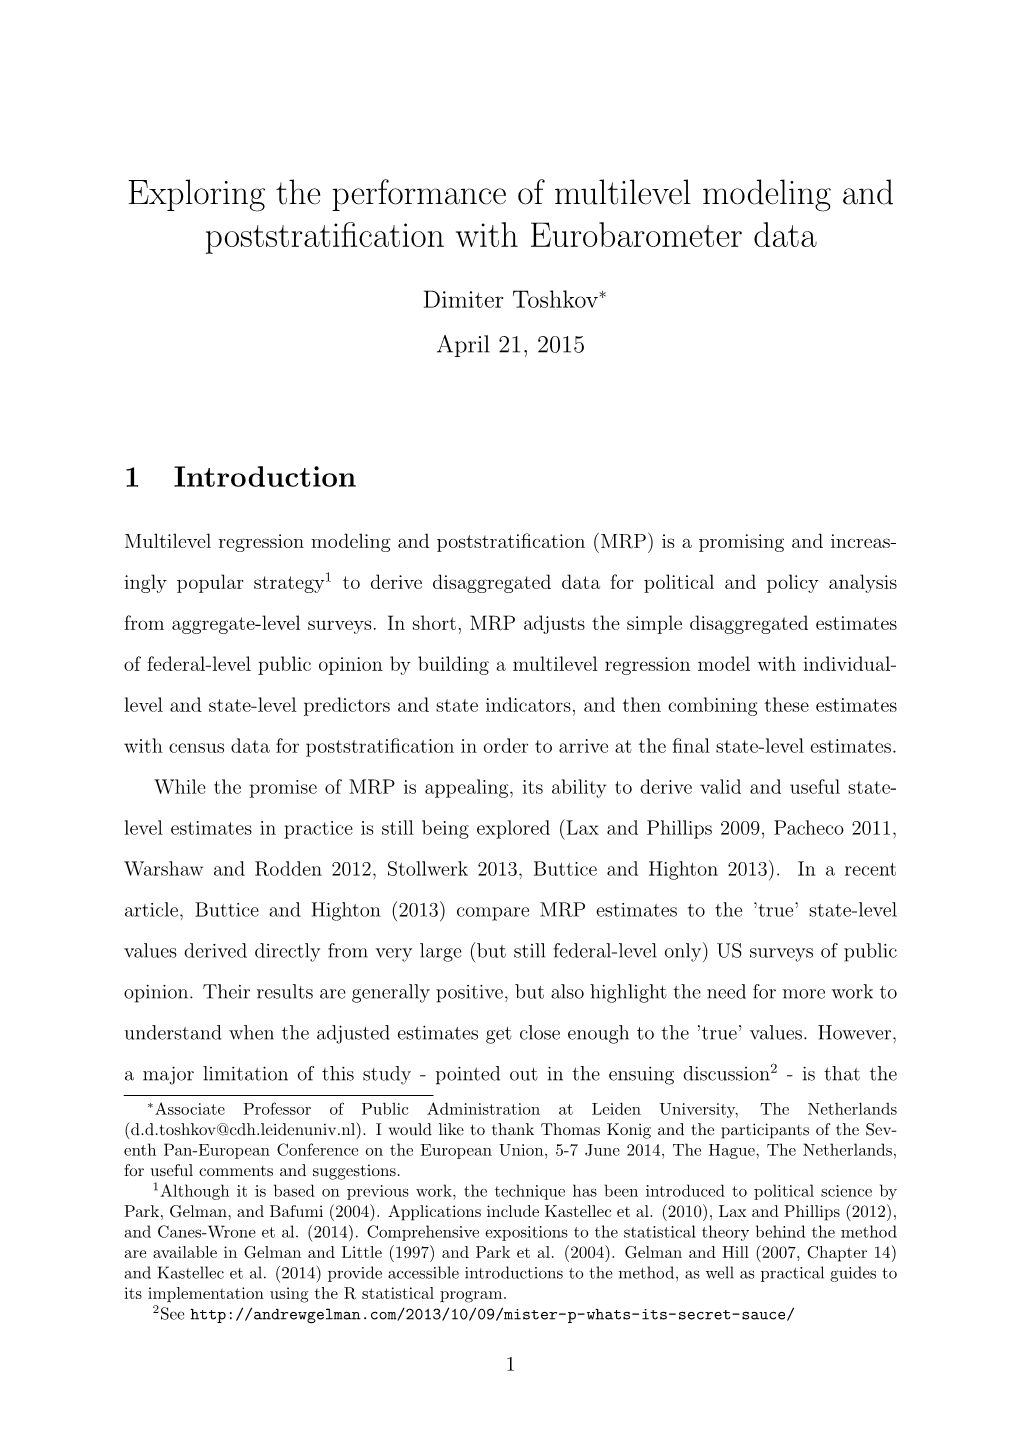 Exploring the Performance of Multilevel Modeling and Poststratiﬁcation with Eurobarometer Data